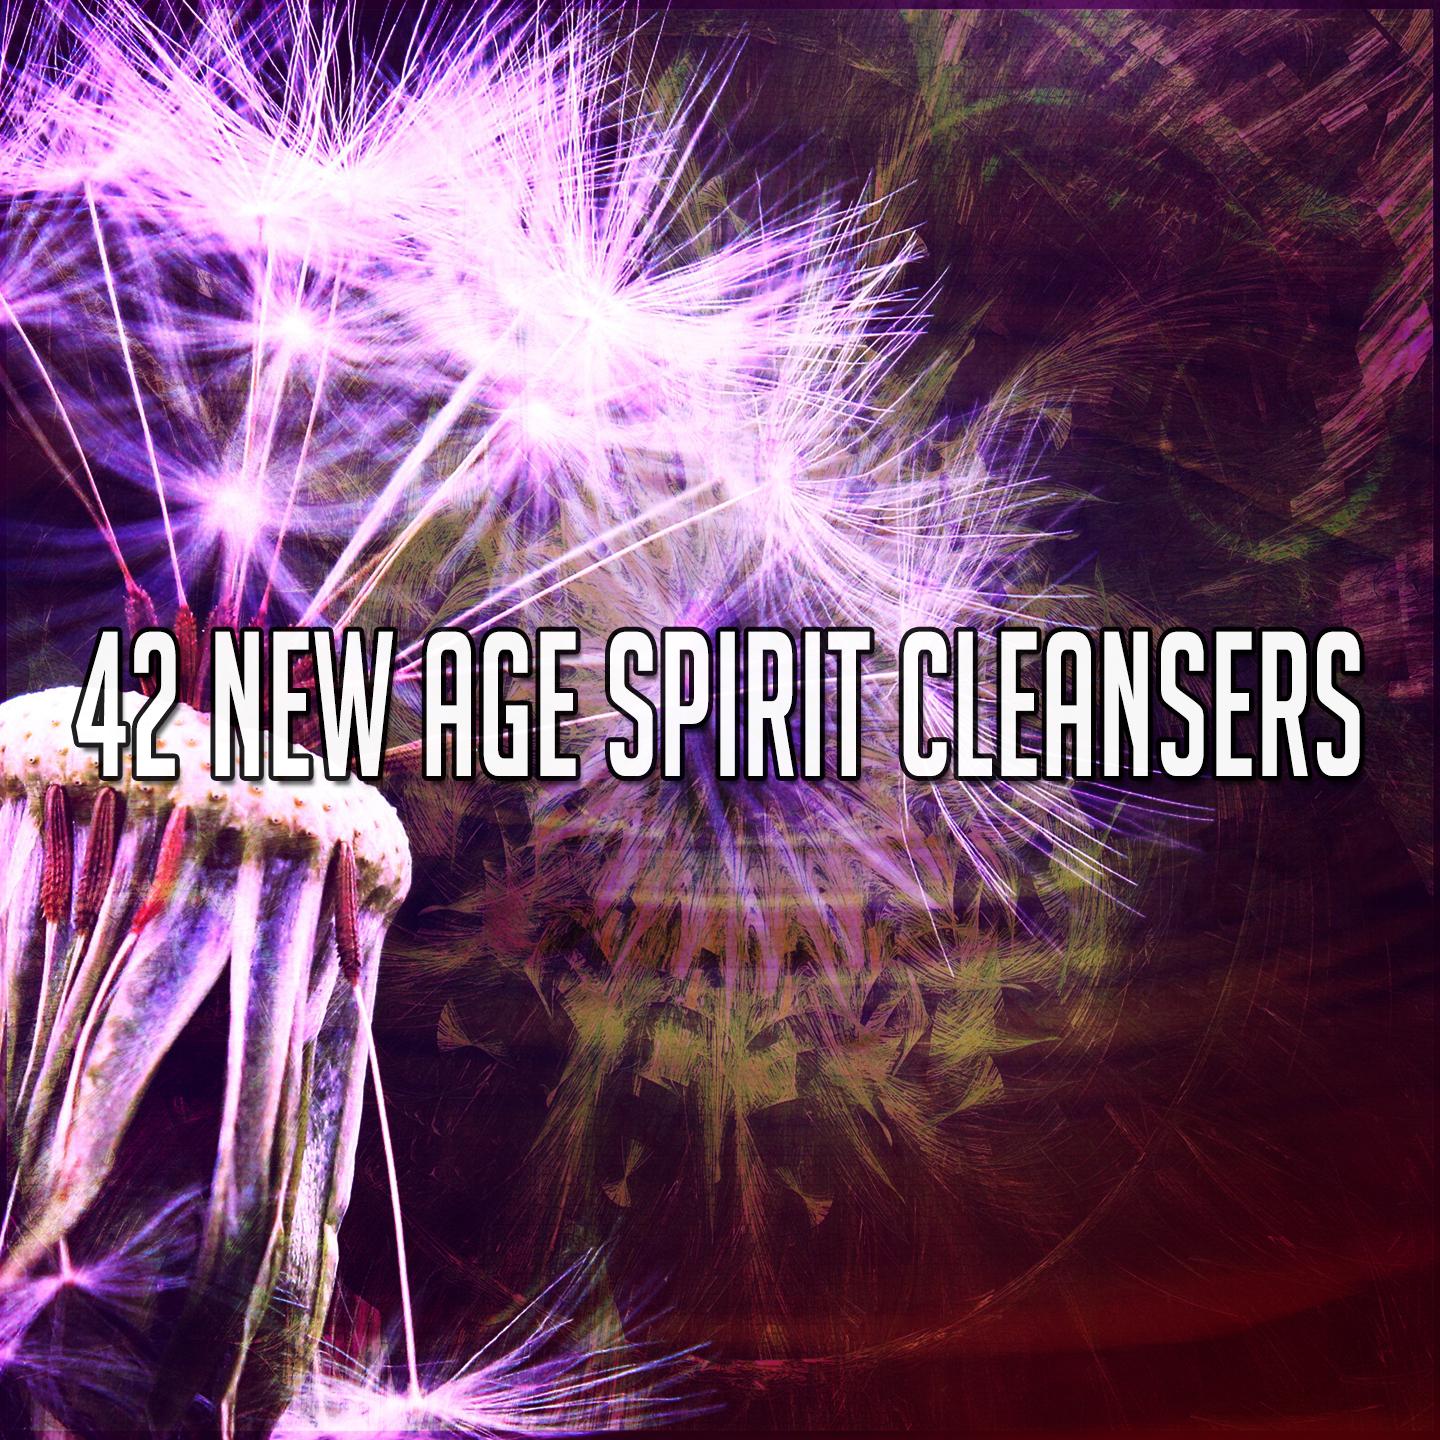 42 New Age Spirit Cleansers